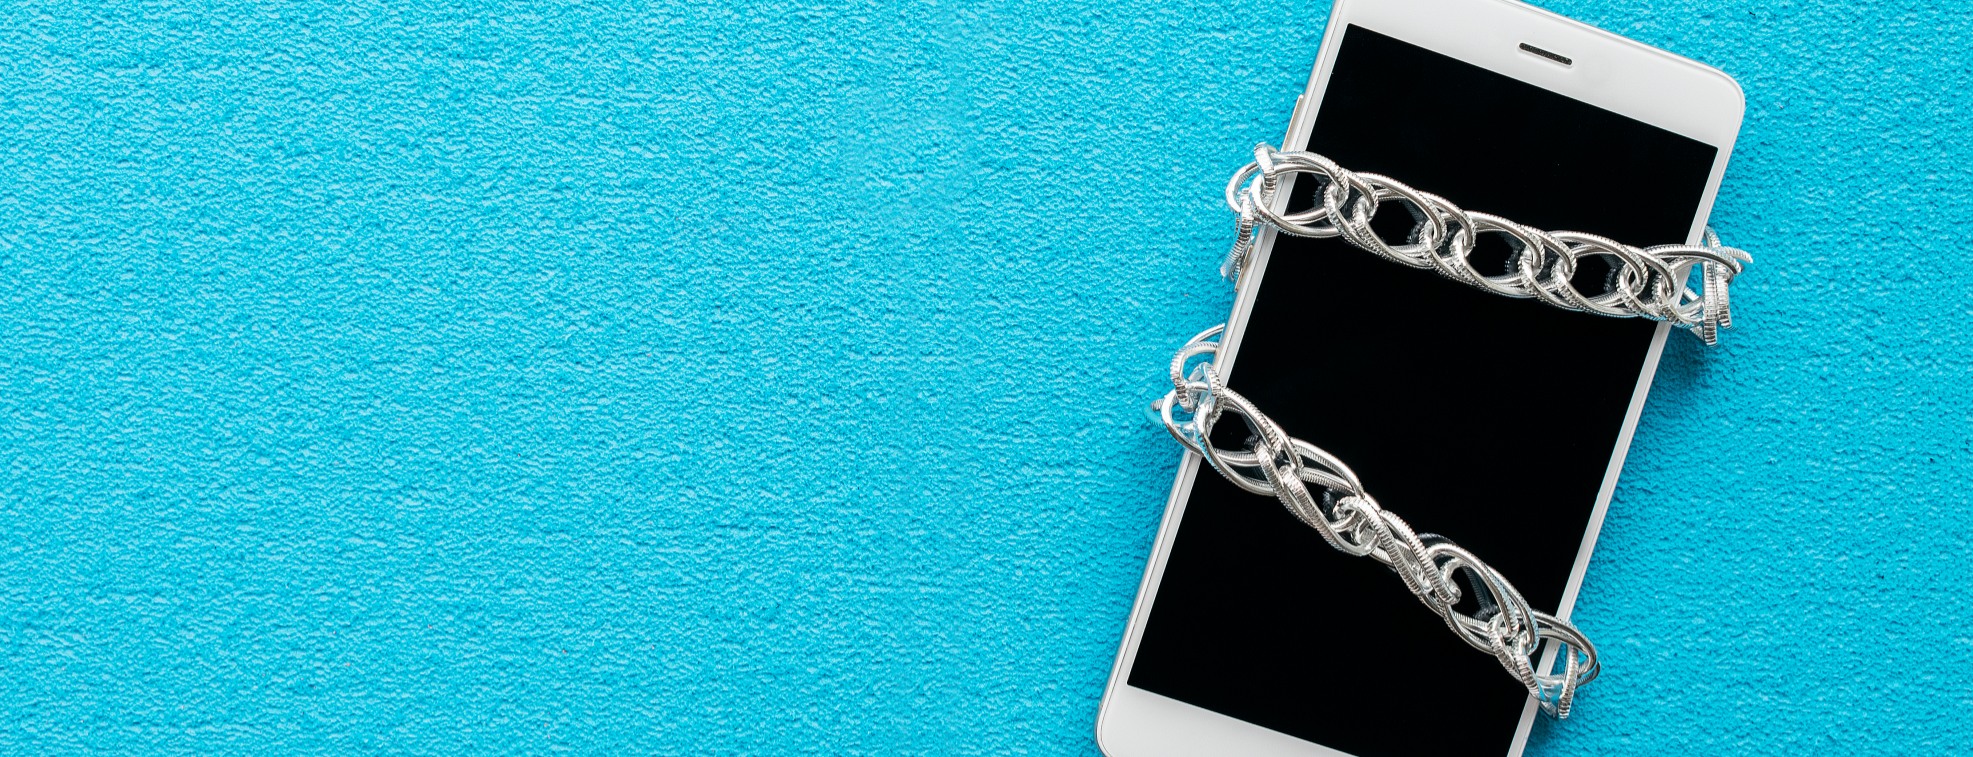 A phone trapped in chain to avoid using it as a distraction